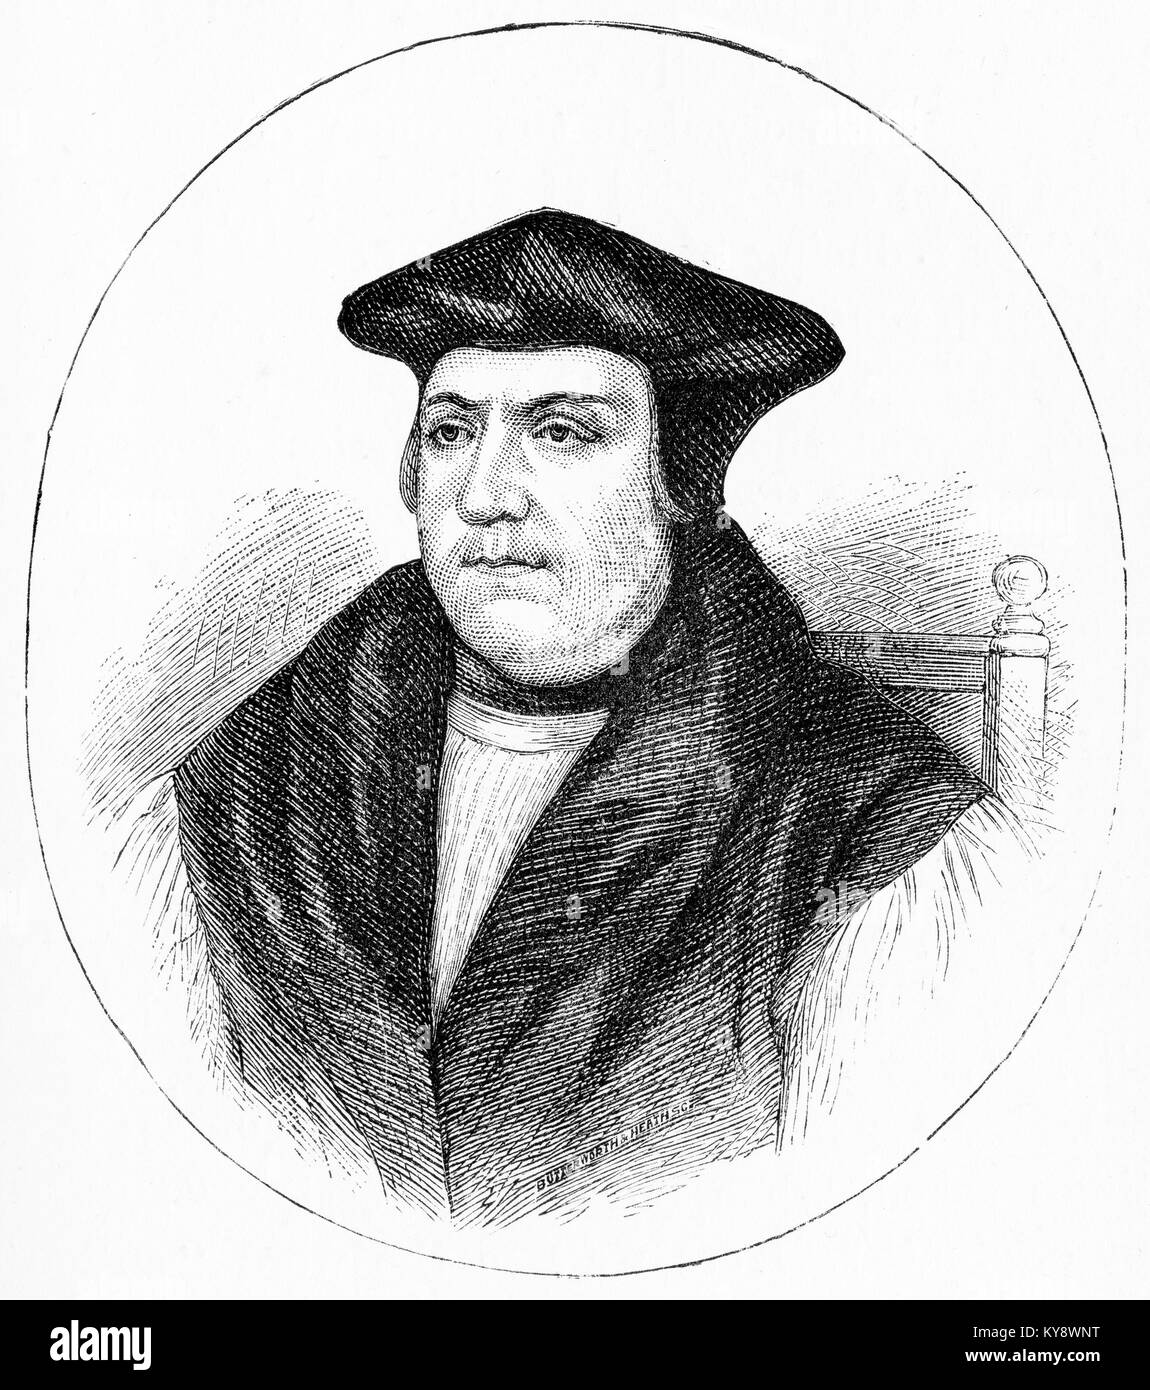 Engraving of Matthew Parker (1504 – 1575) Archbishop of Canterbury 1559 - 575. Influential theologian and co-founder (with Thomas Cranmer and Richard Hooker) of Anglican theology.. From Our English Bible by John Stoughton, circa 1900. Stock Photo